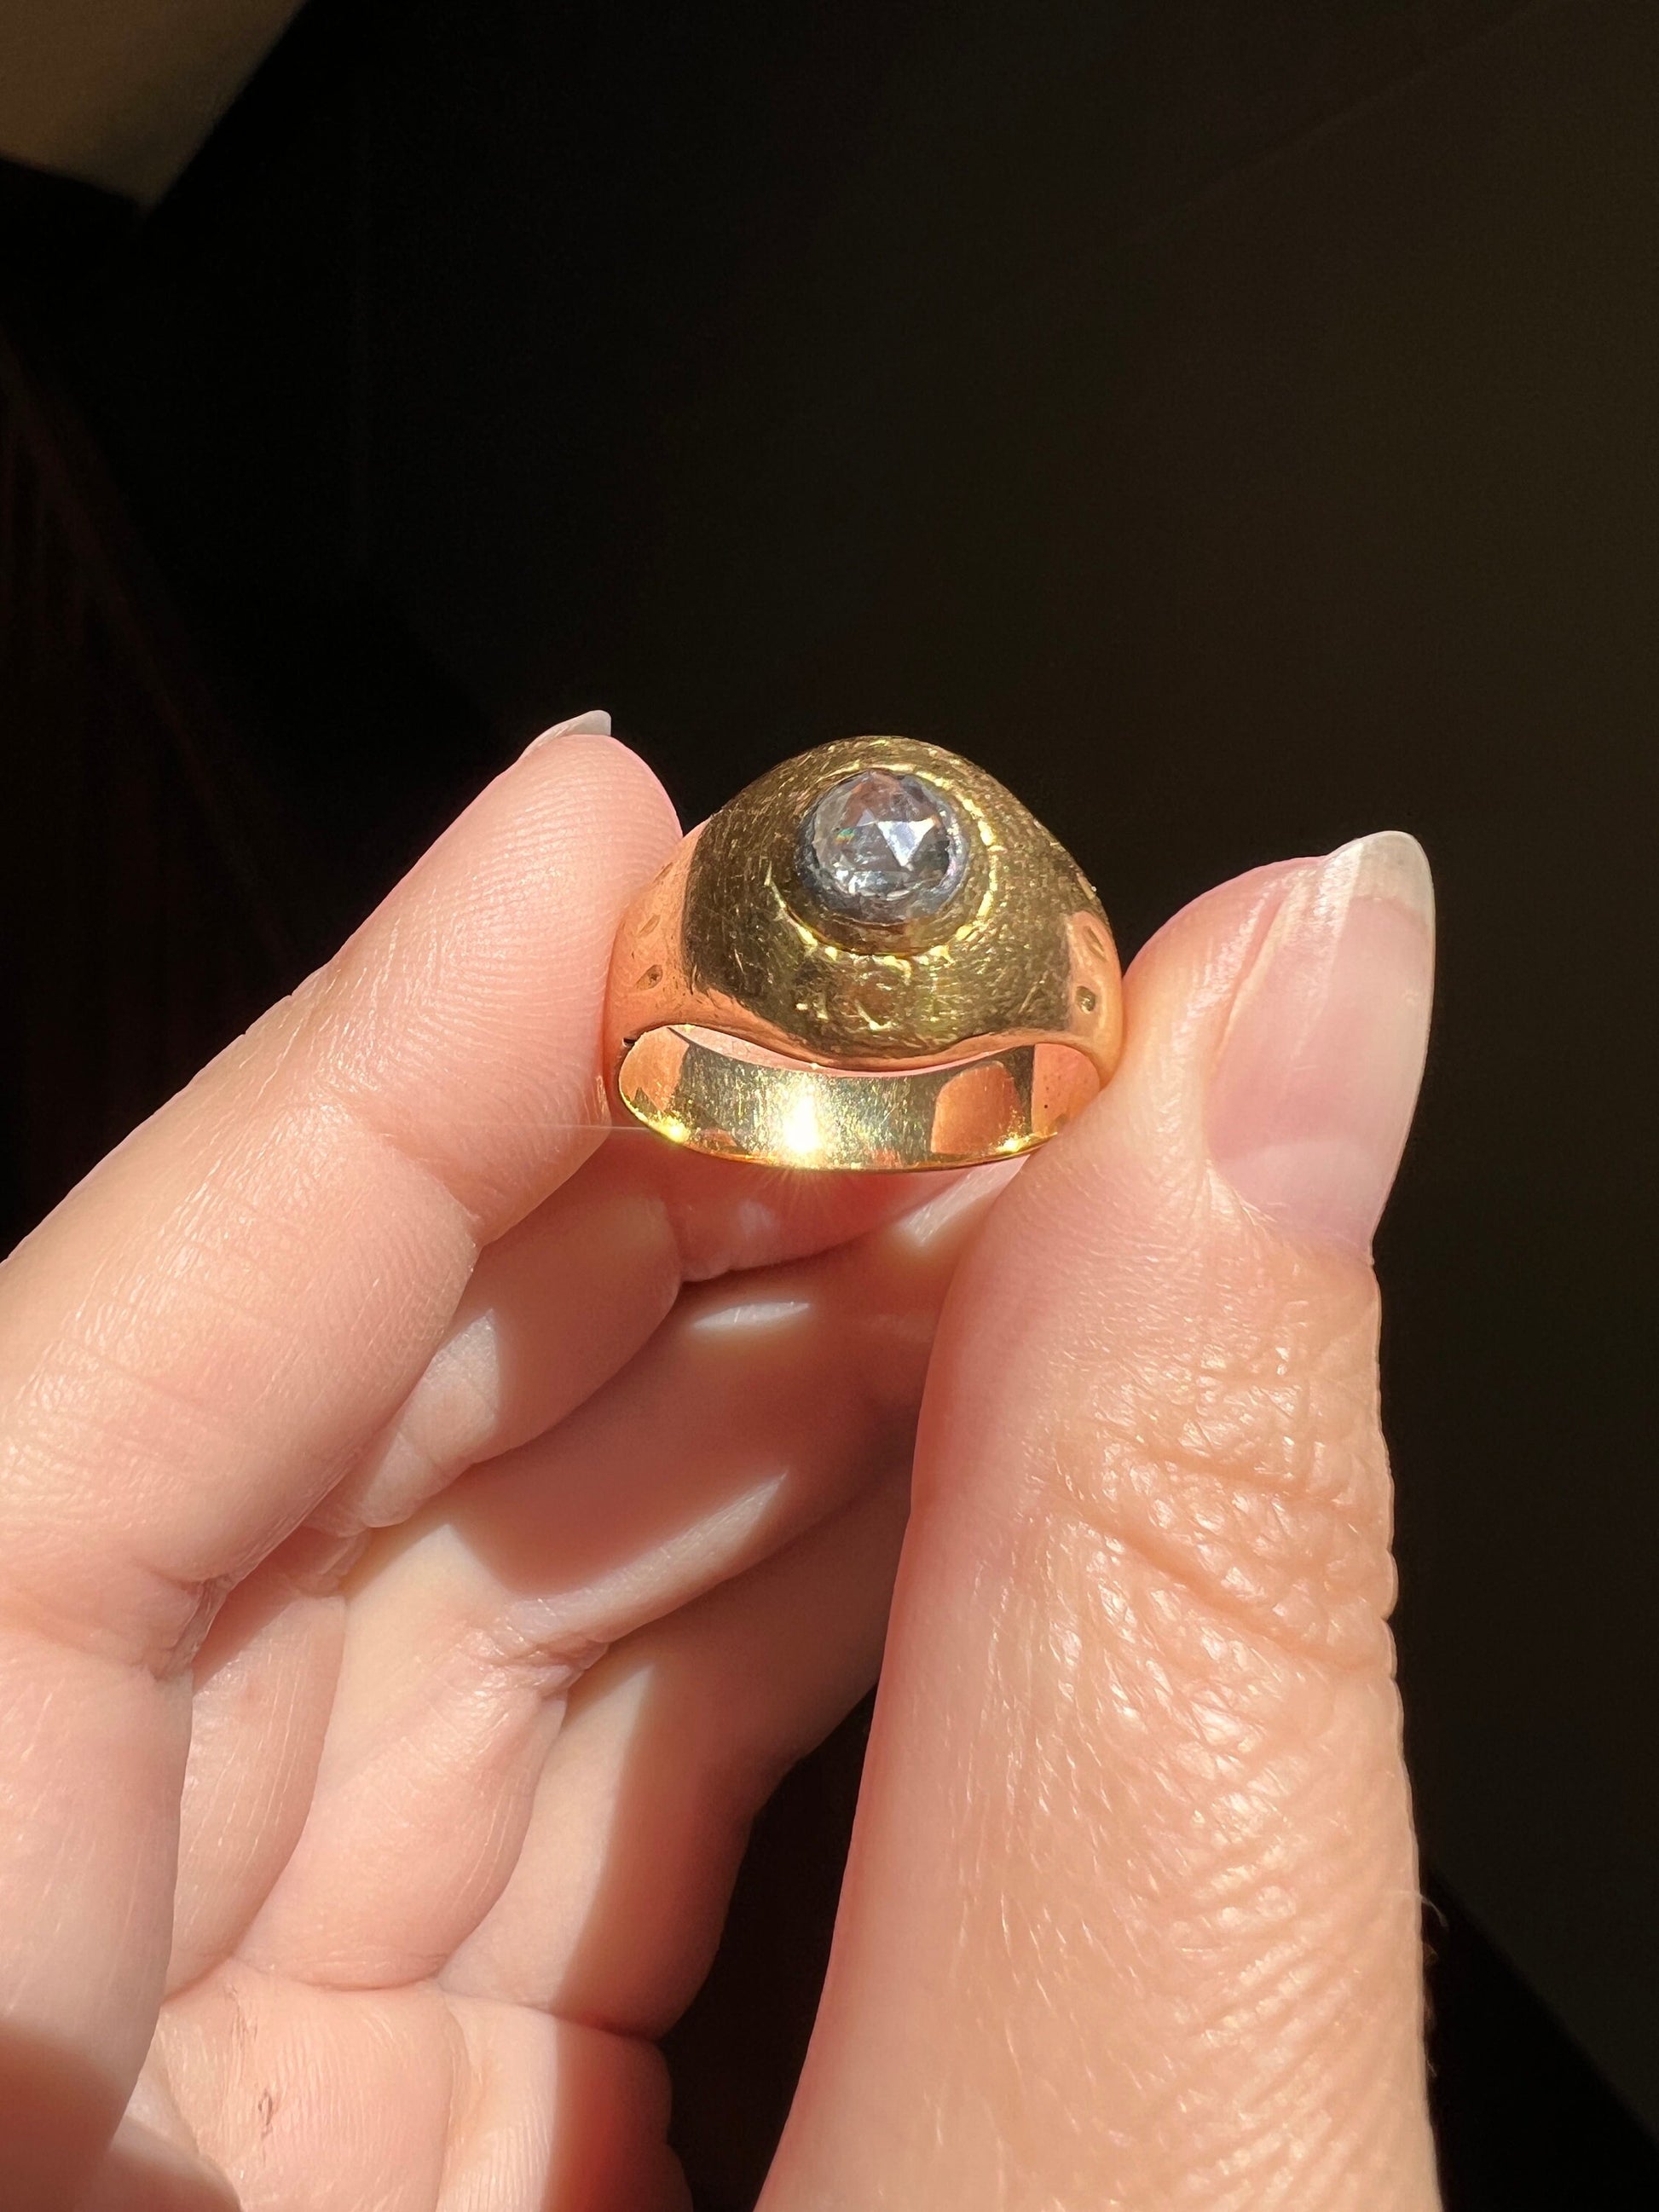 HEAVY French Antique 10.4g 18k Gold Rose Cut DIAMOND Domed Gypsy Glowing Chunky Band Unisex Man Ring Engraved Disco Ball Victorian Gift